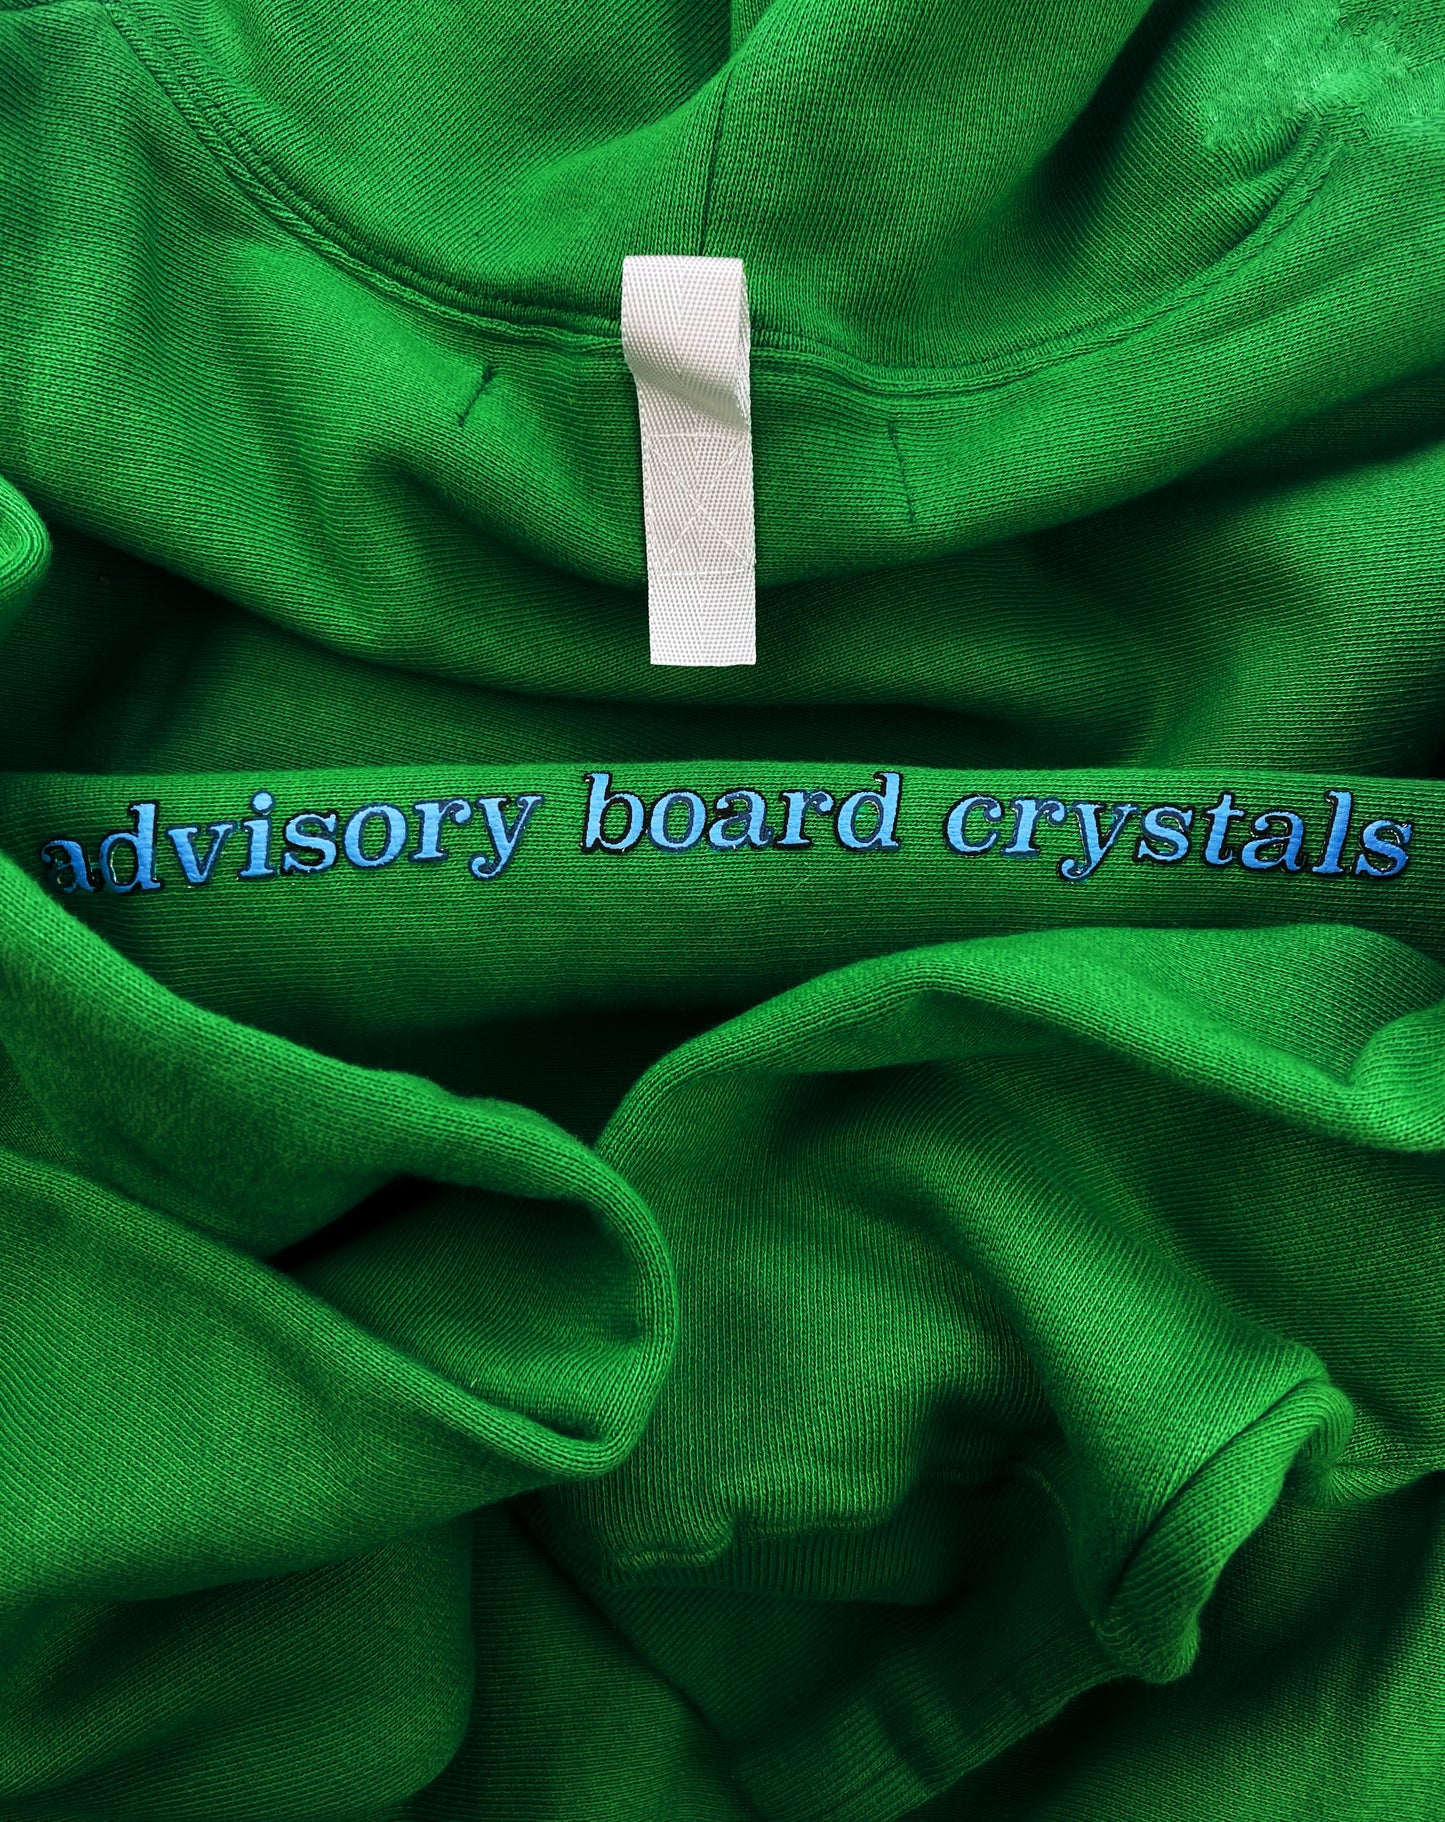 2021 Advisory Board Crystals Get Rich Pullover Hoodie